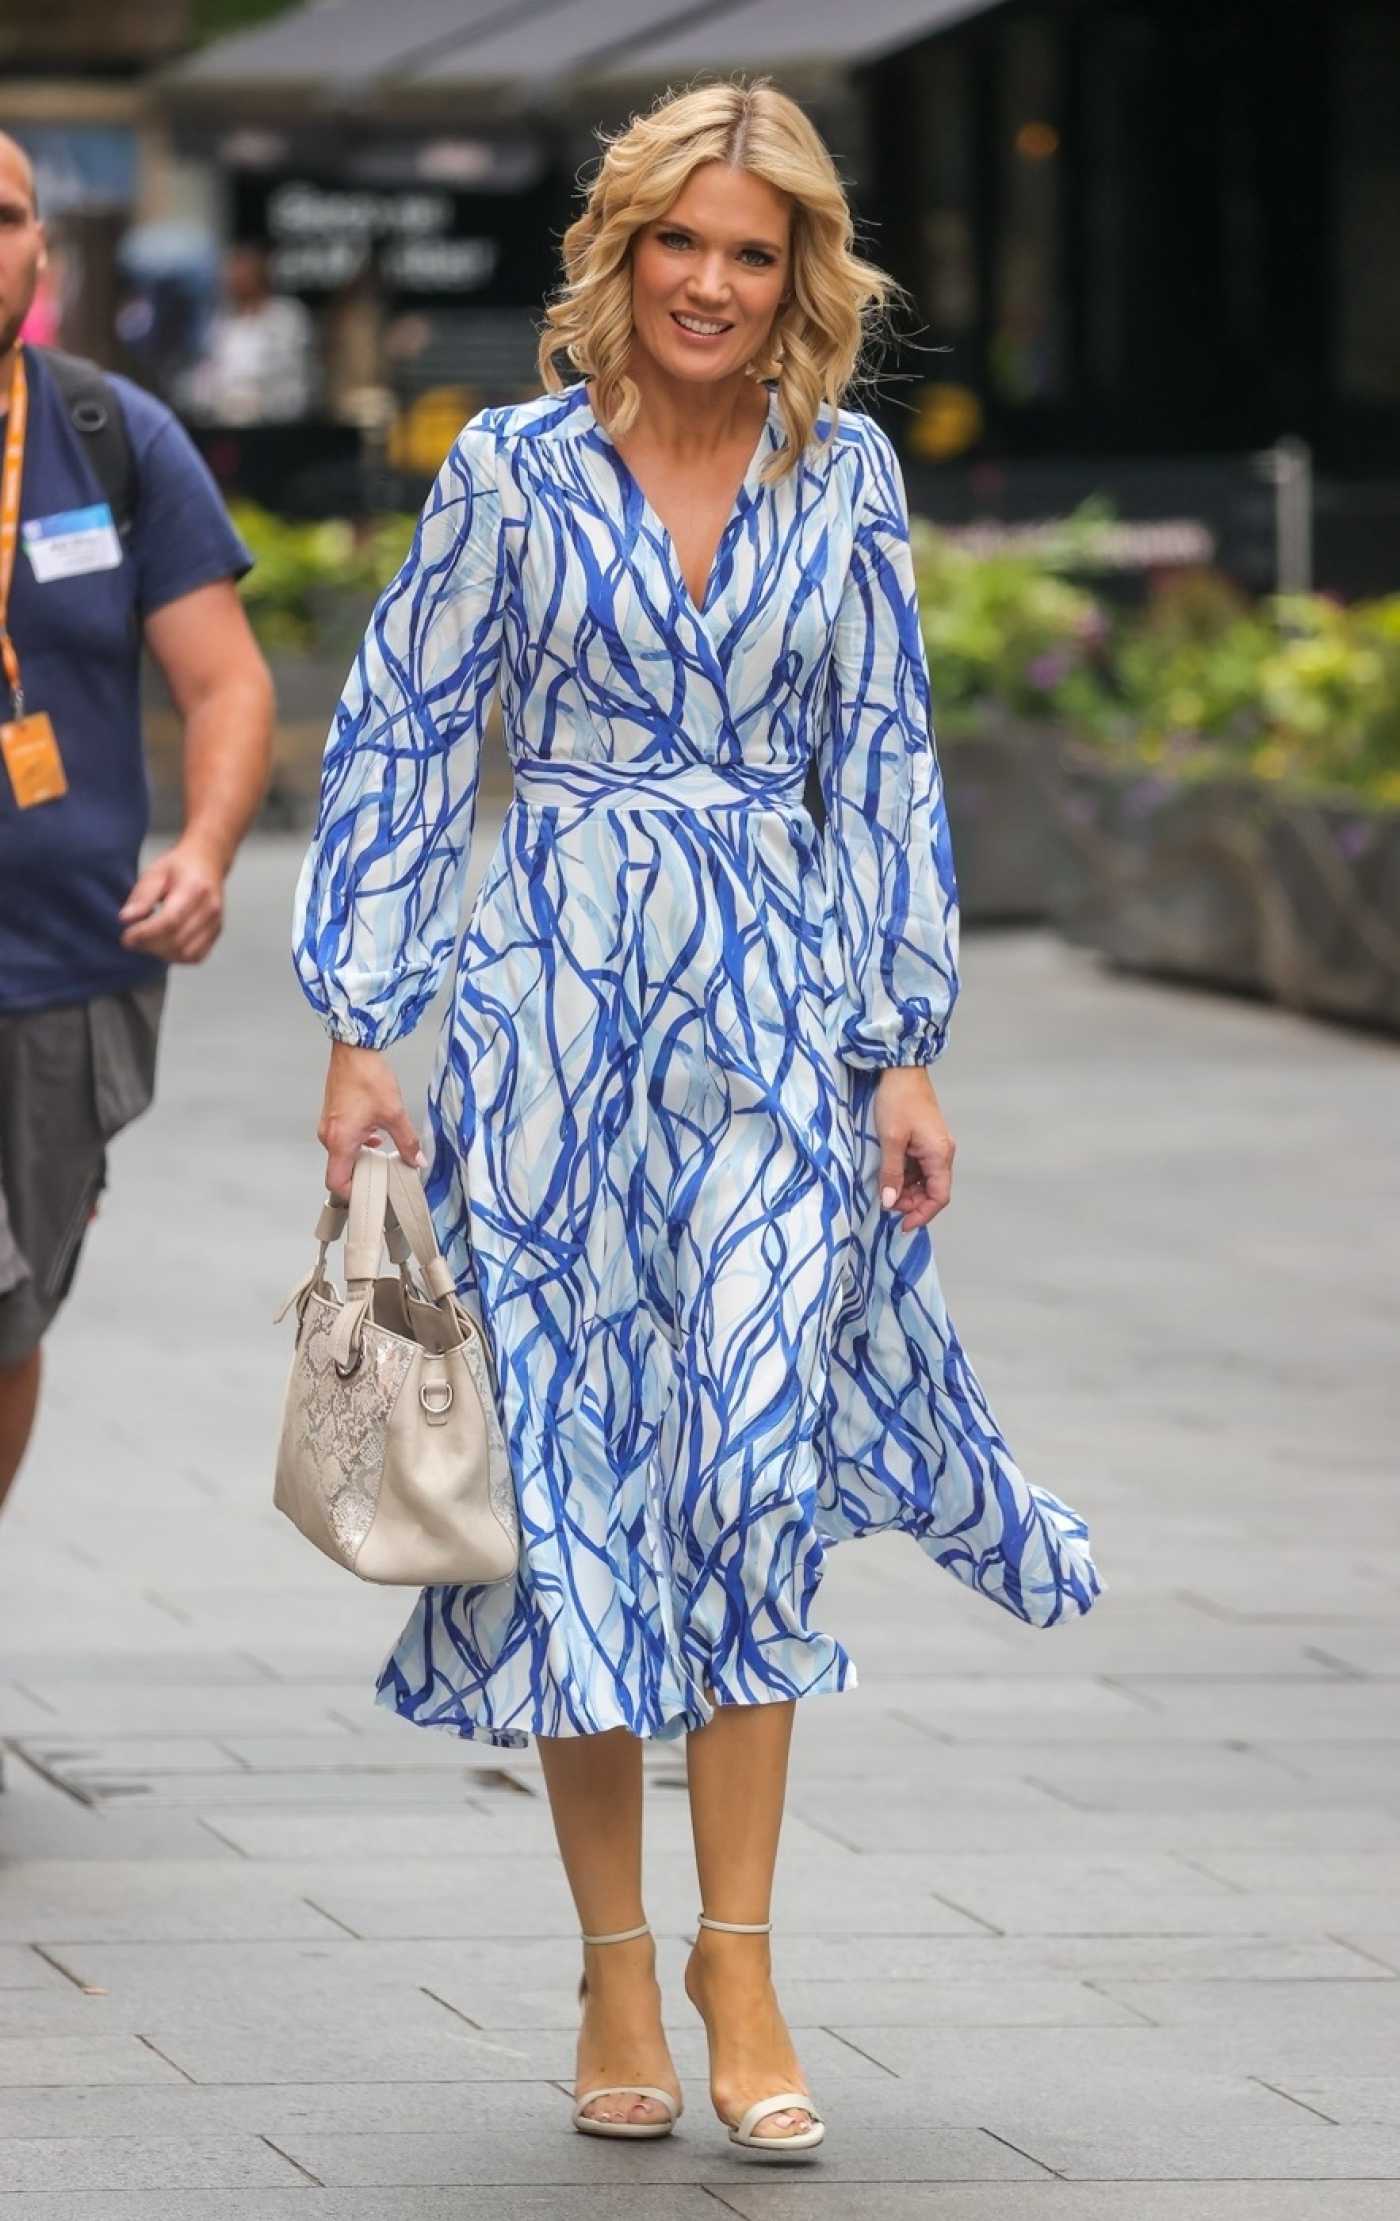 Charlotte Hawkins in a Blue Dress Arrives at the Global Radio in London 06/30/2022